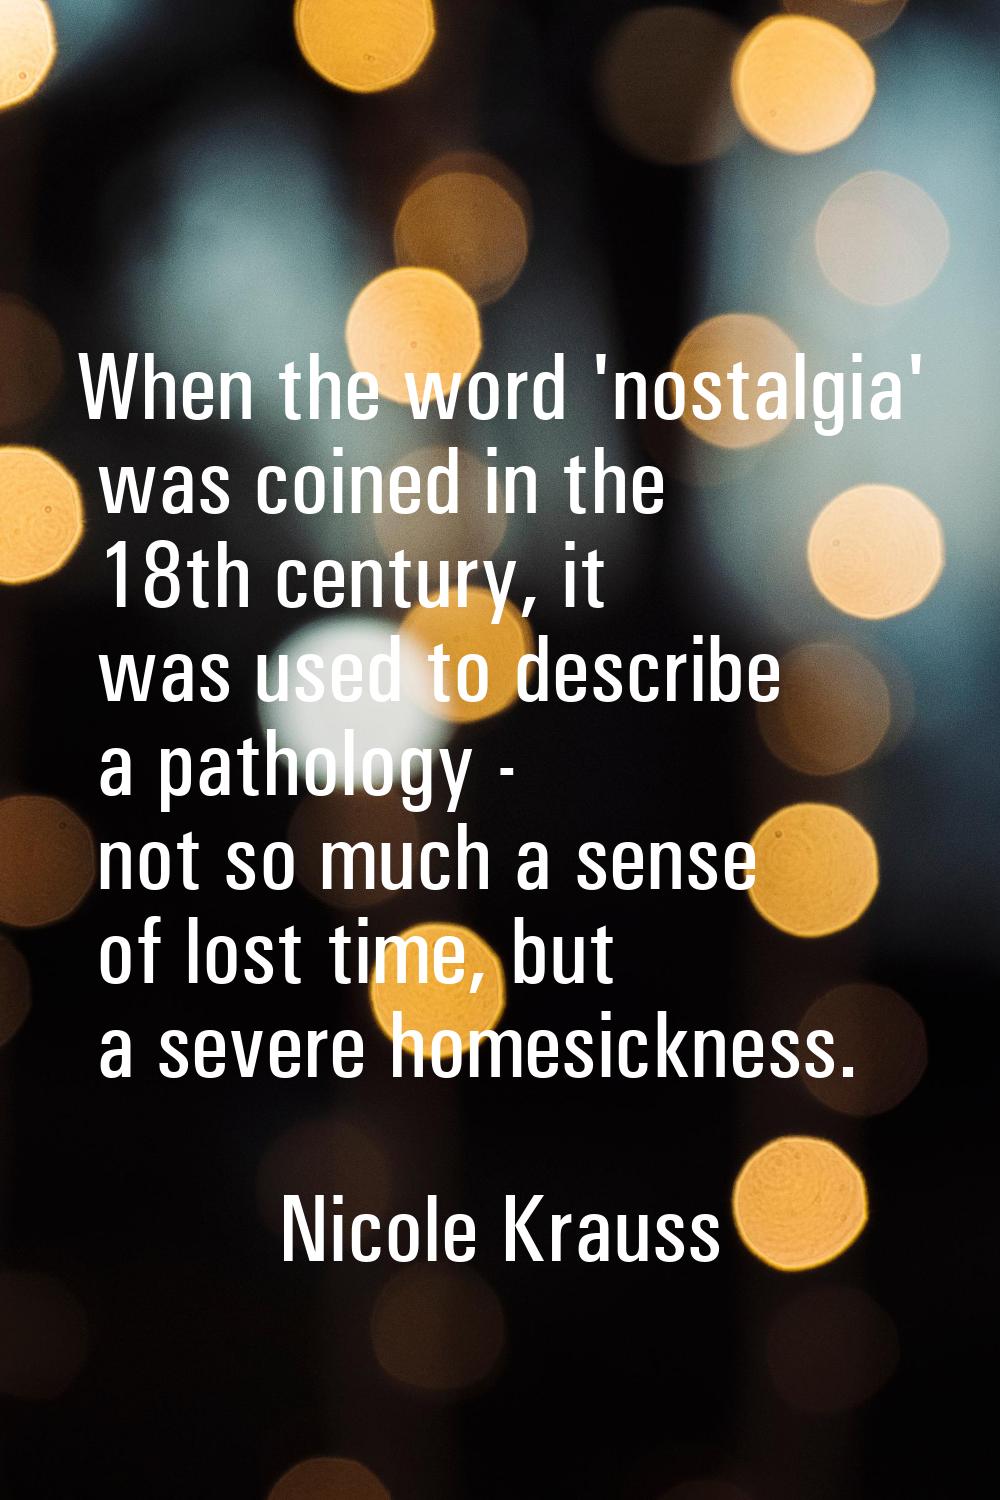 When the word 'nostalgia' was coined in the 18th century, it was used to describe a pathology - not